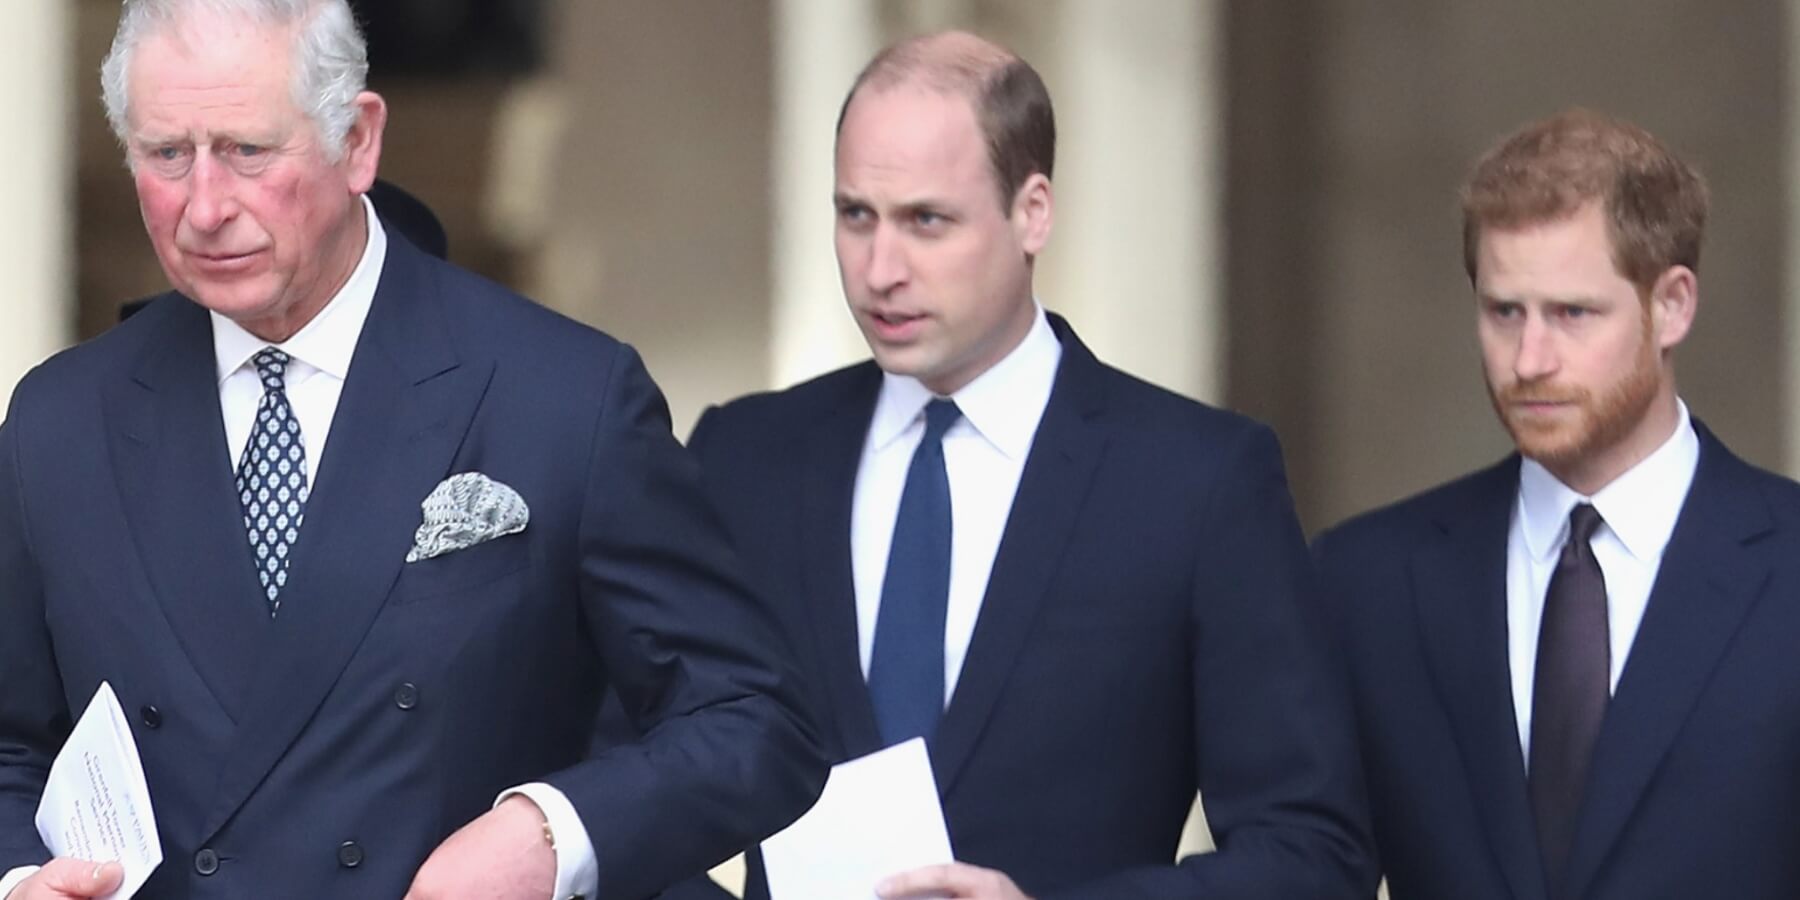 King Charles, Prince William and Prince Harry photographed together at St Paul's Cathedral on December 14, 2017, in London, England.